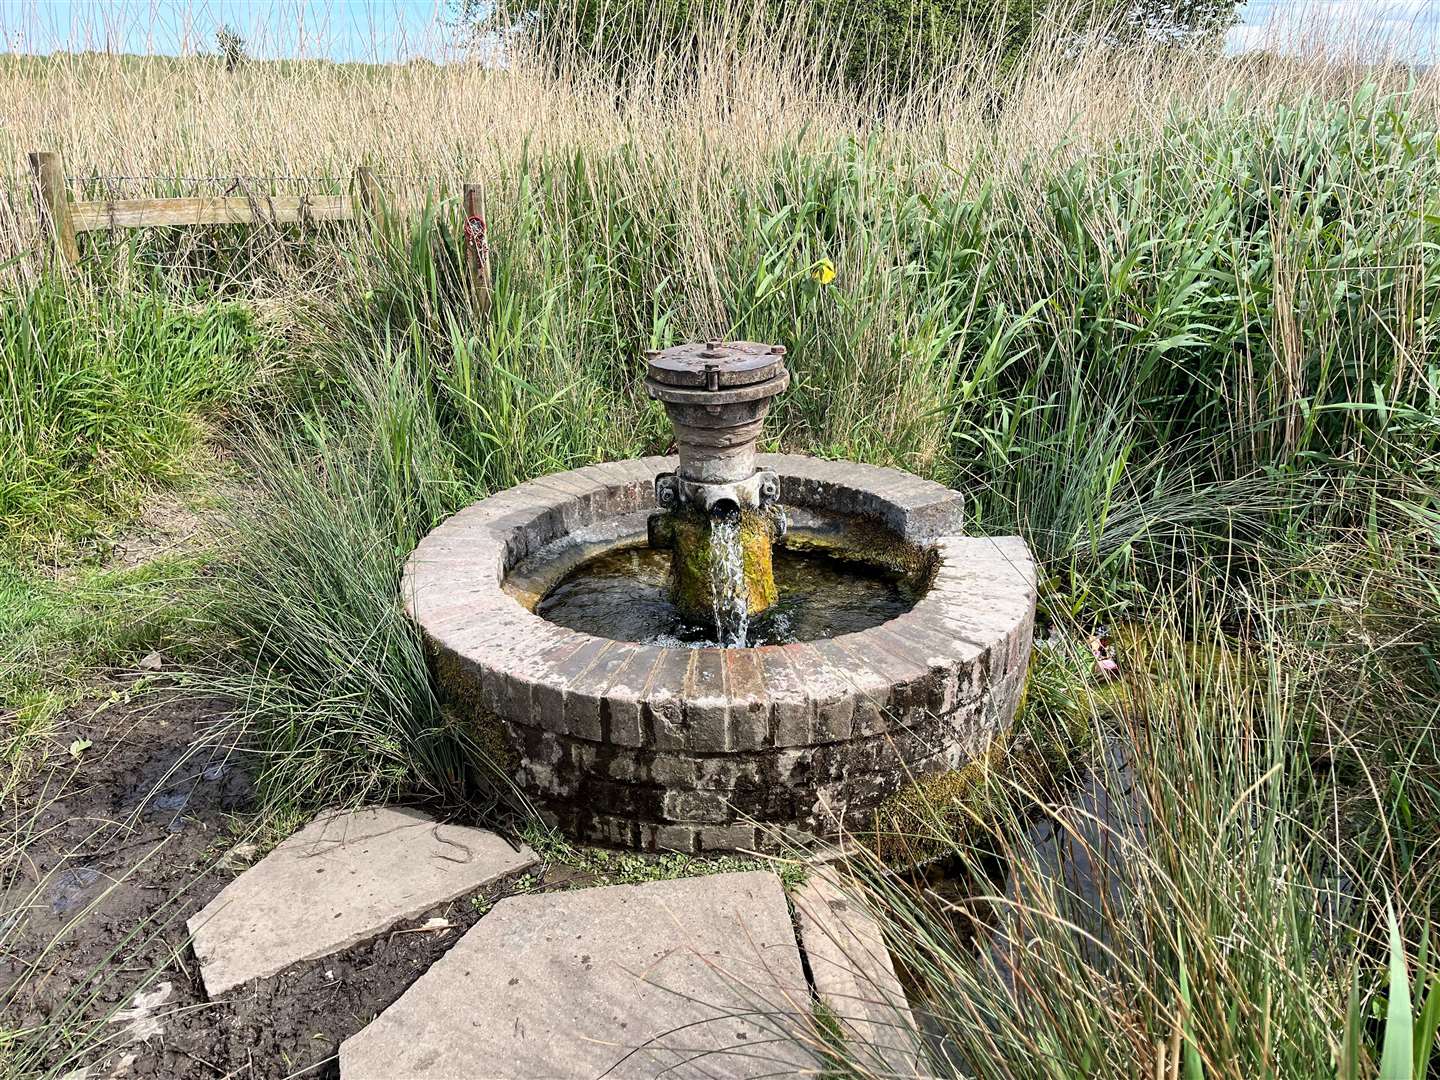 The well, which provides safe drinking water, is more than 100 years old